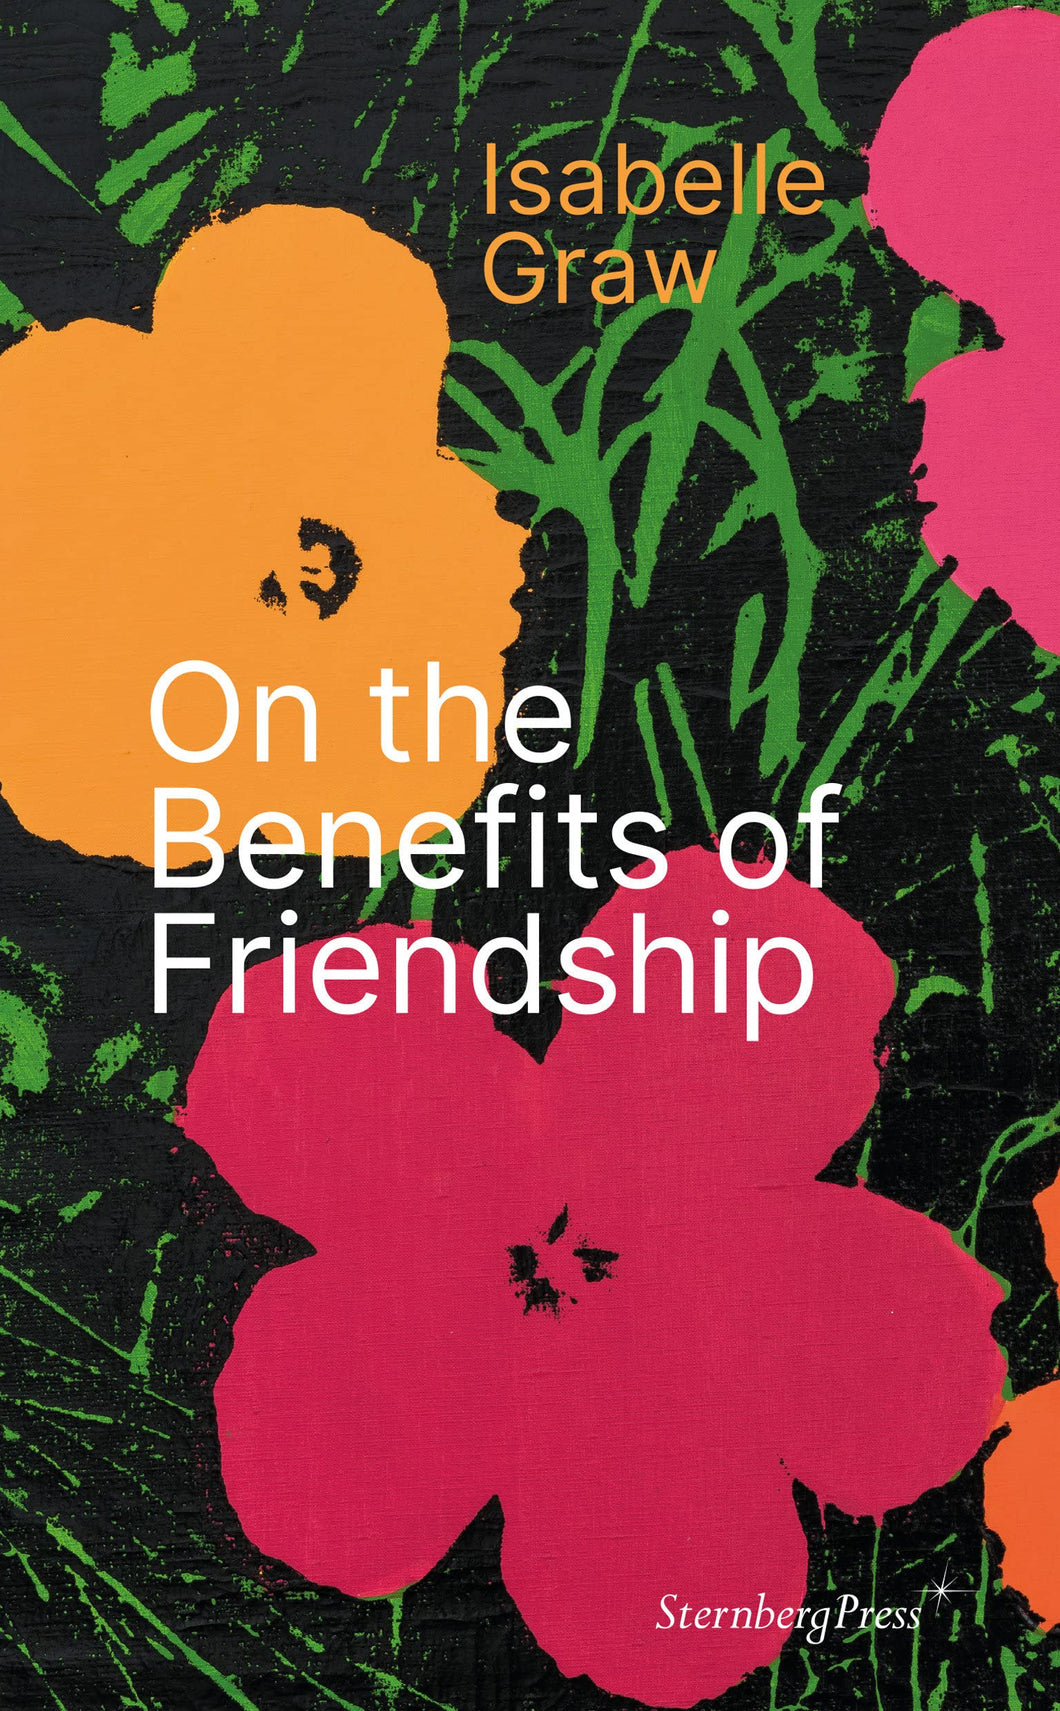 Isabelle Graw: On the Benefits of Friendship